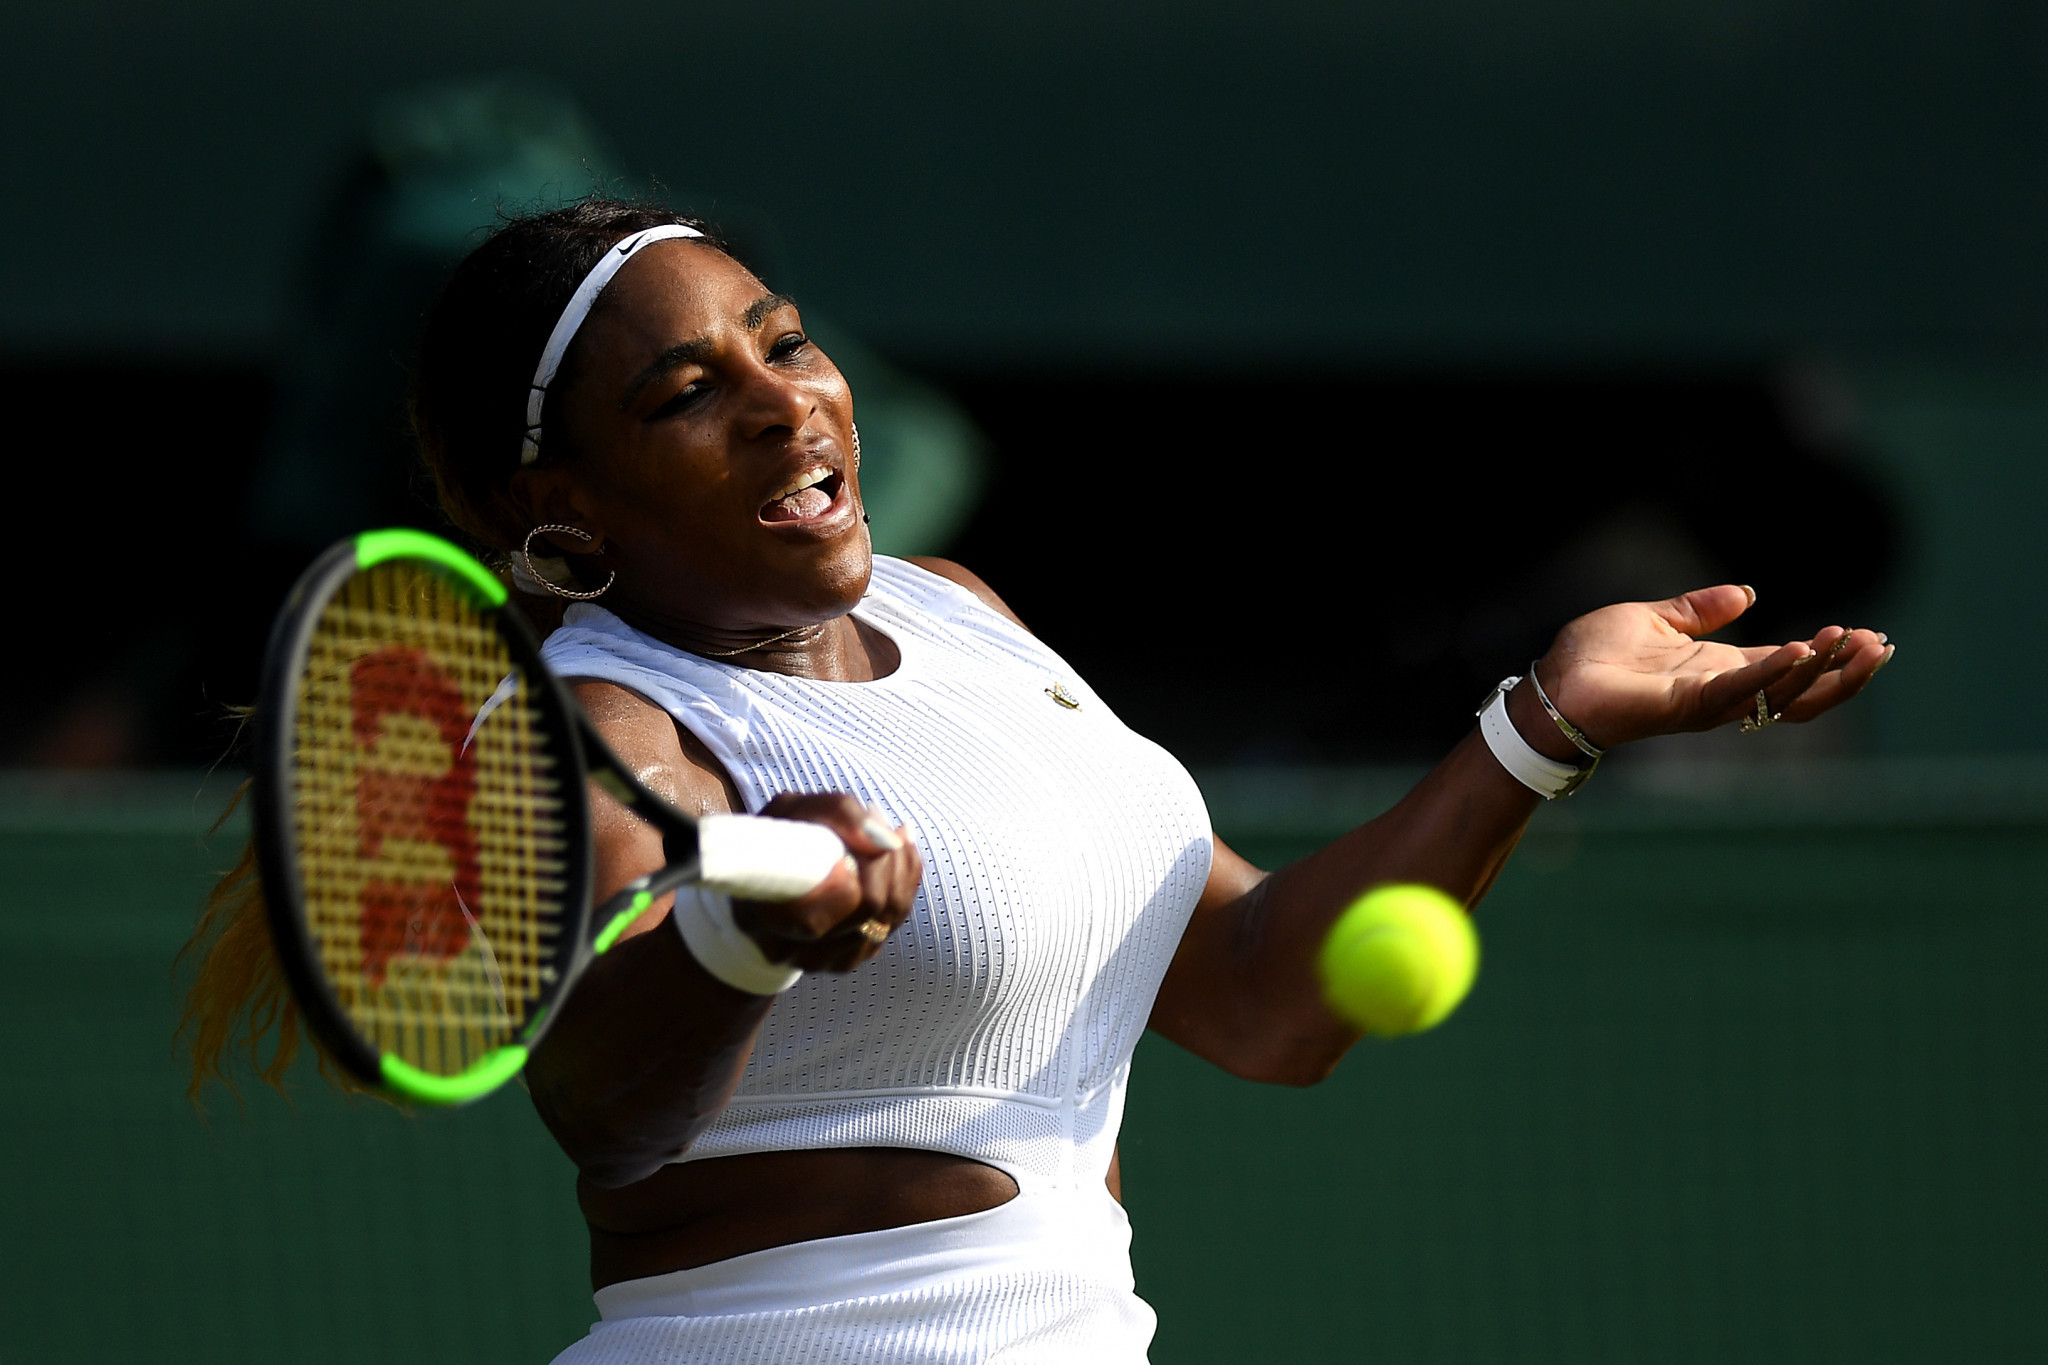 Seven-time Wimbledon champion Serena Williams moved into the second round of the women's singles event with a comfortable victory over Italy's Giulia Gatto-Monticone ©Getty Images